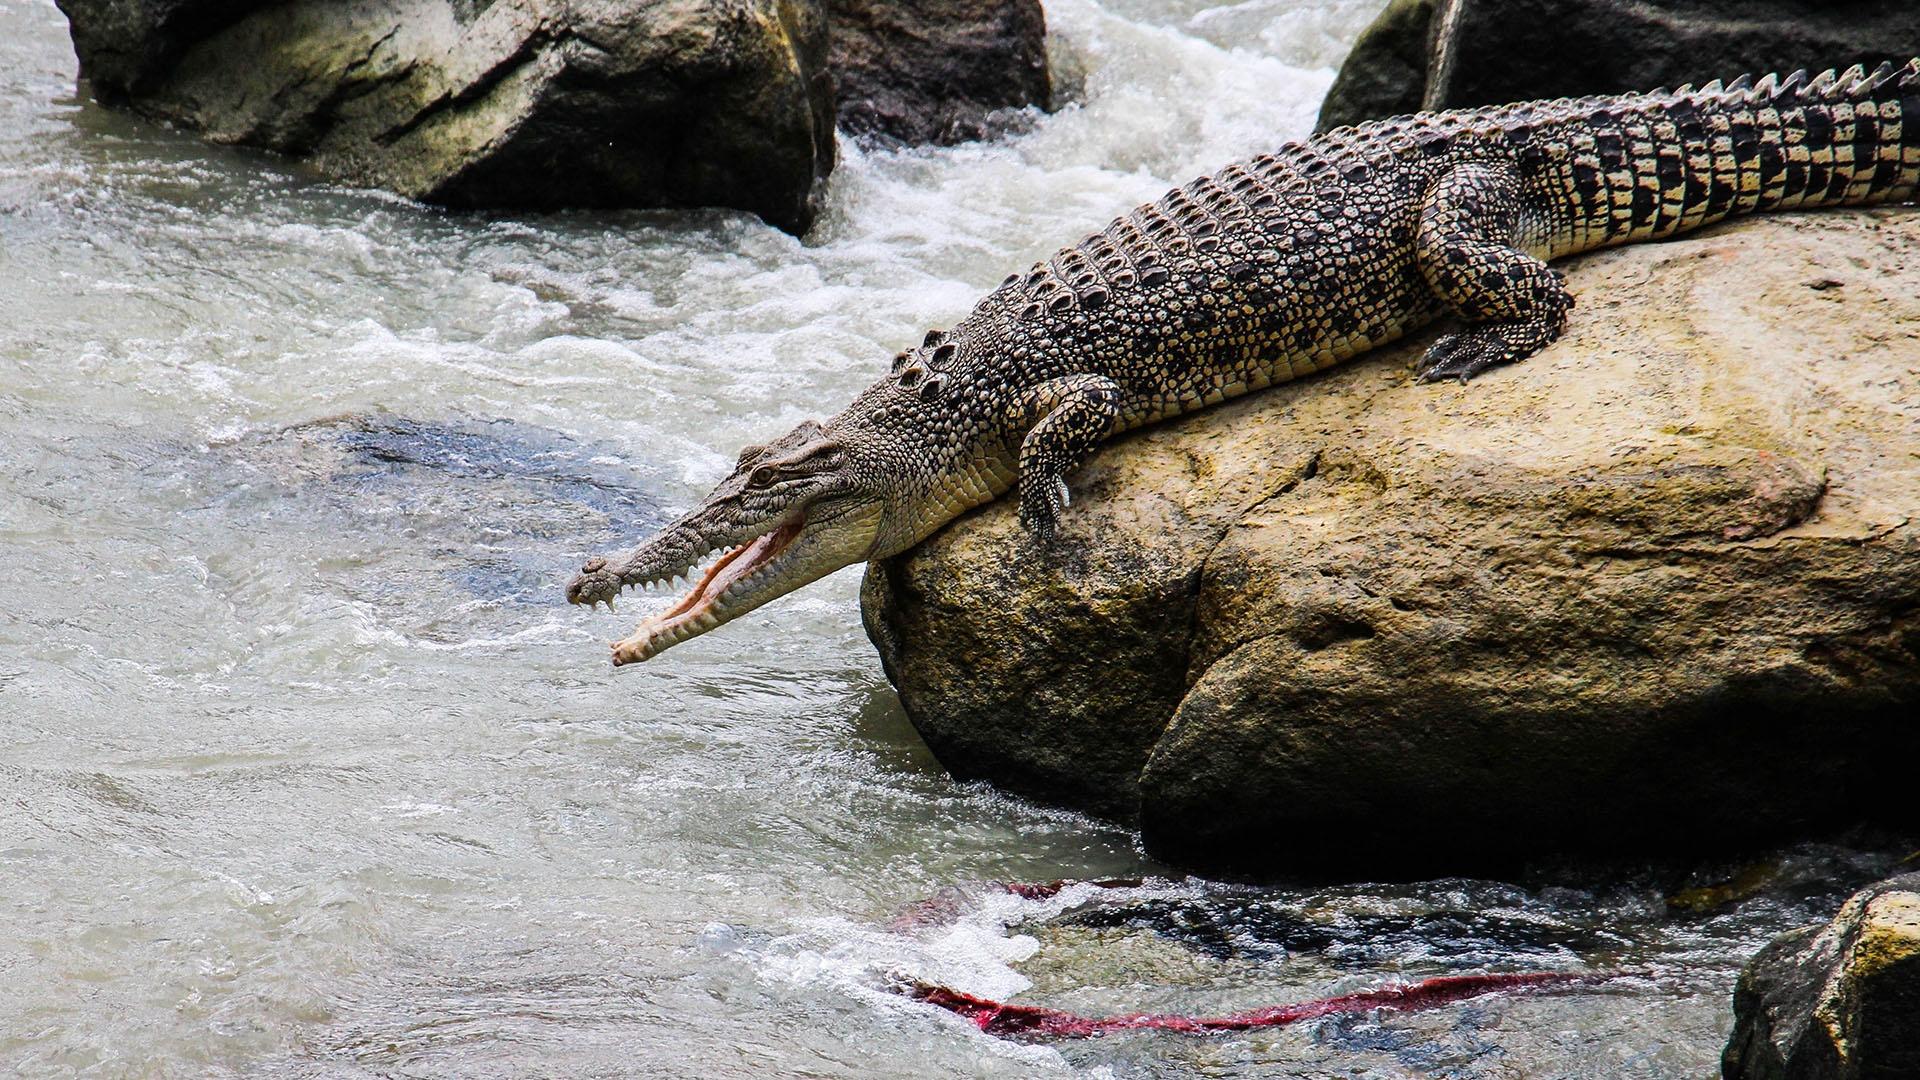 Image of a crocodile siting on a rock.